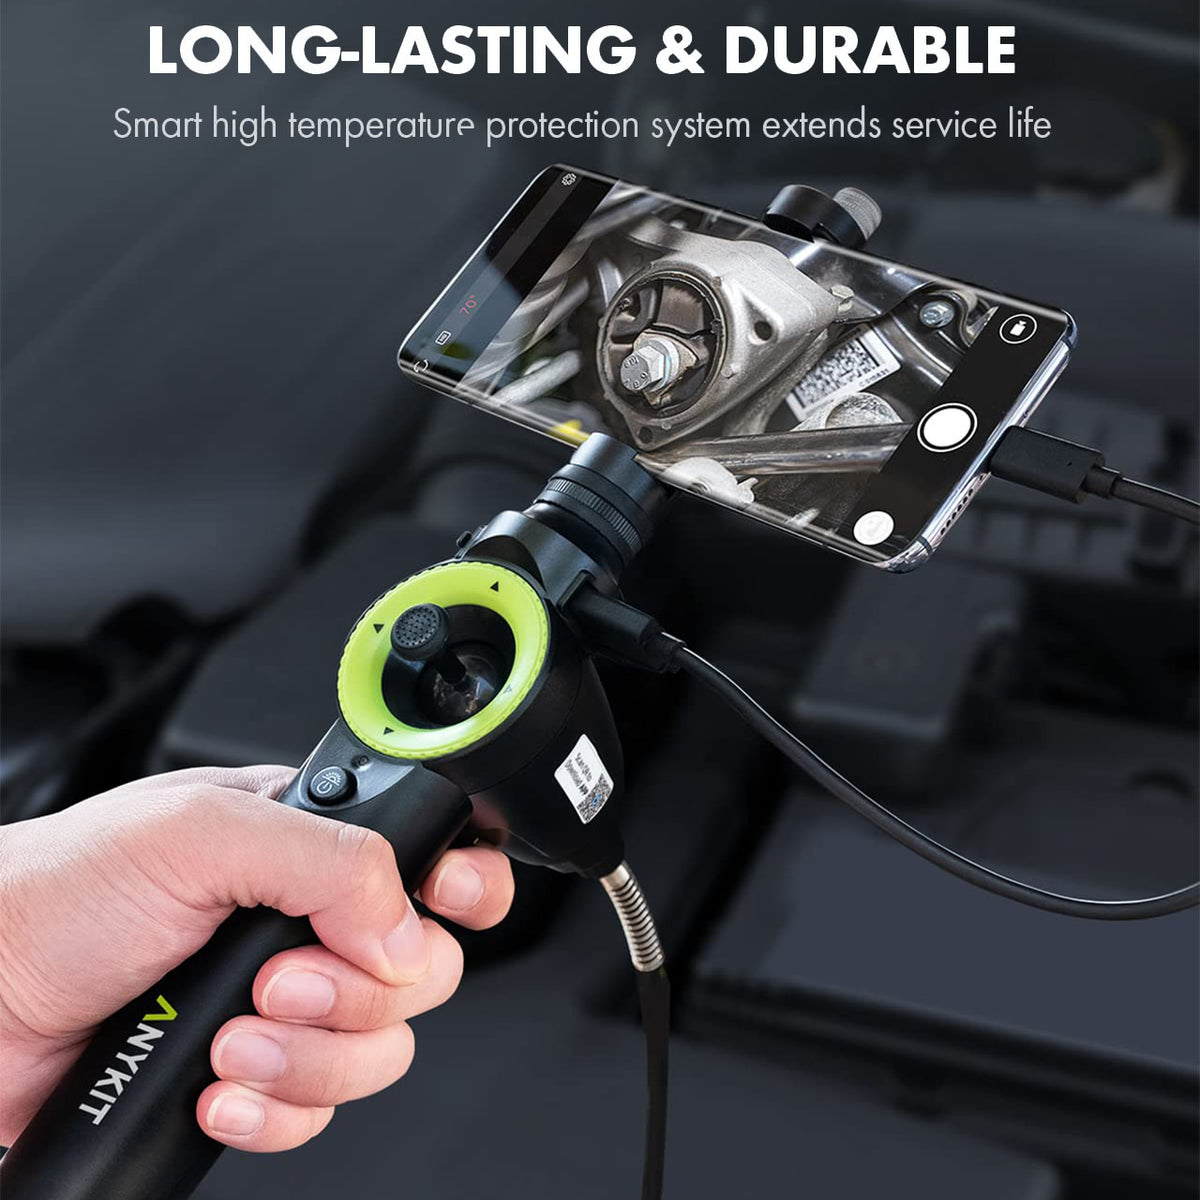 Anykit 360° 4 Ways Articulating Borescope, Industrial Endoscope with 0.26 in Articulated Snake Camera, Inspection Camera with 4 Adjustable LED Lights Compatible with iPhone and Android - 3.3ft